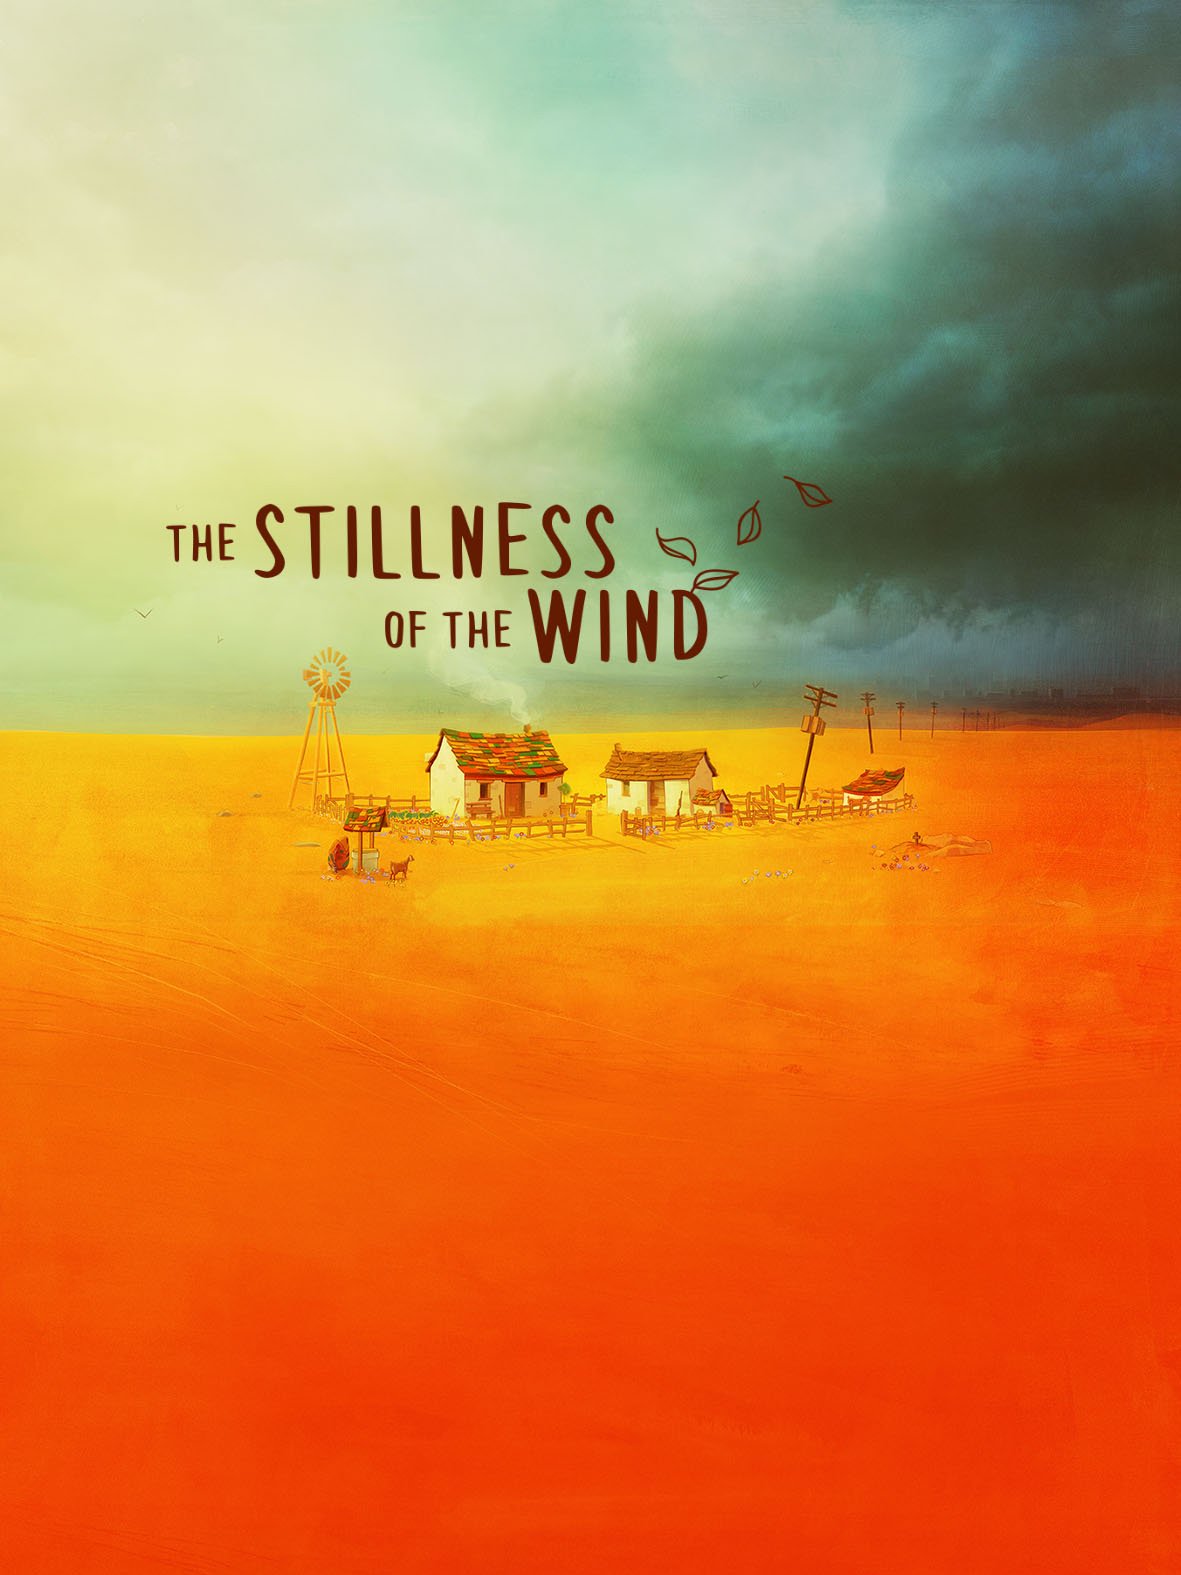 Image of The Stillness of the Wind